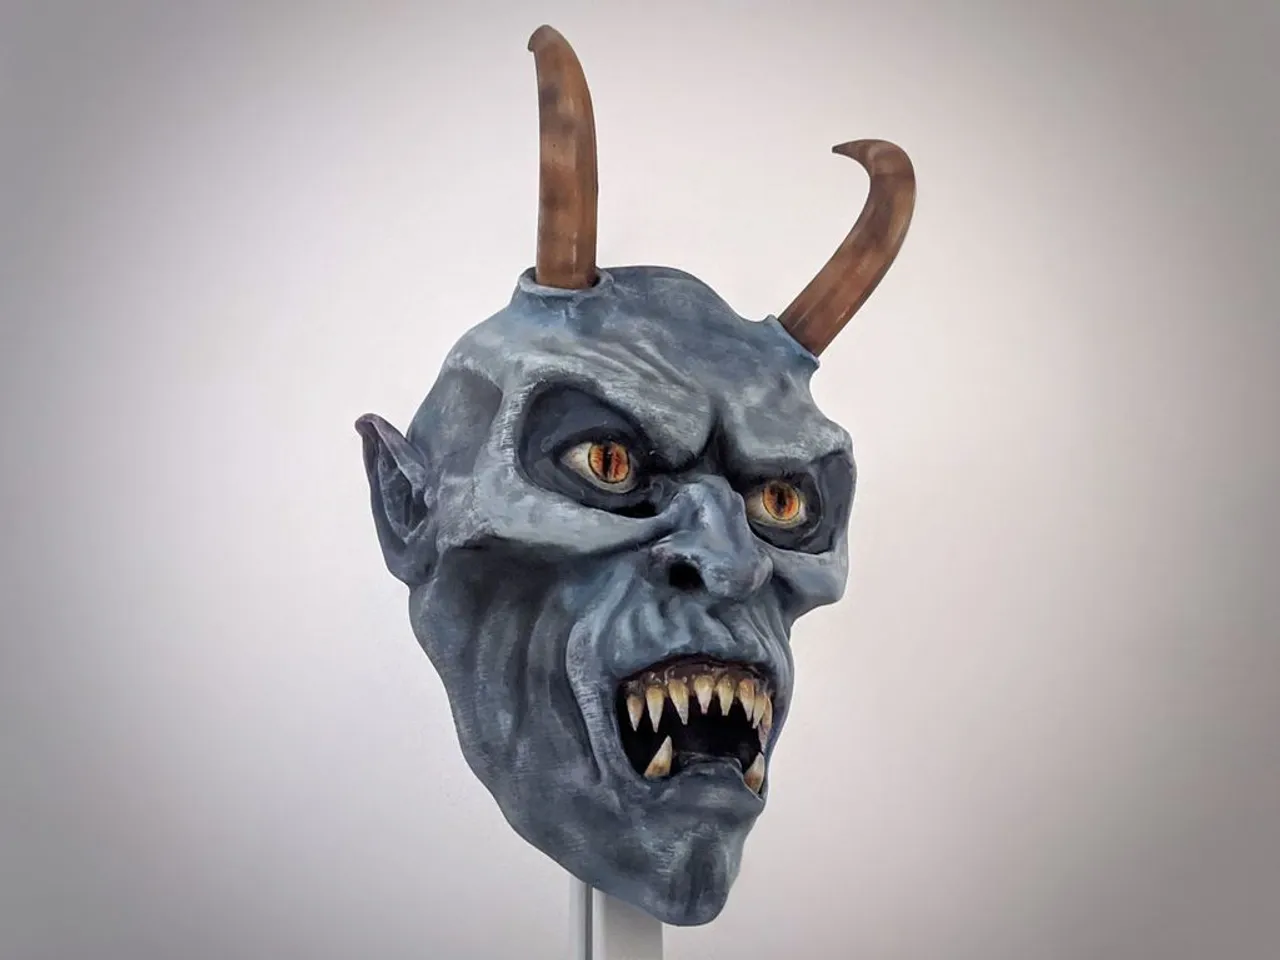 Wearable, 3d Printed Krampus Mask by Creatures and Theming | Download free STL | Printables.com